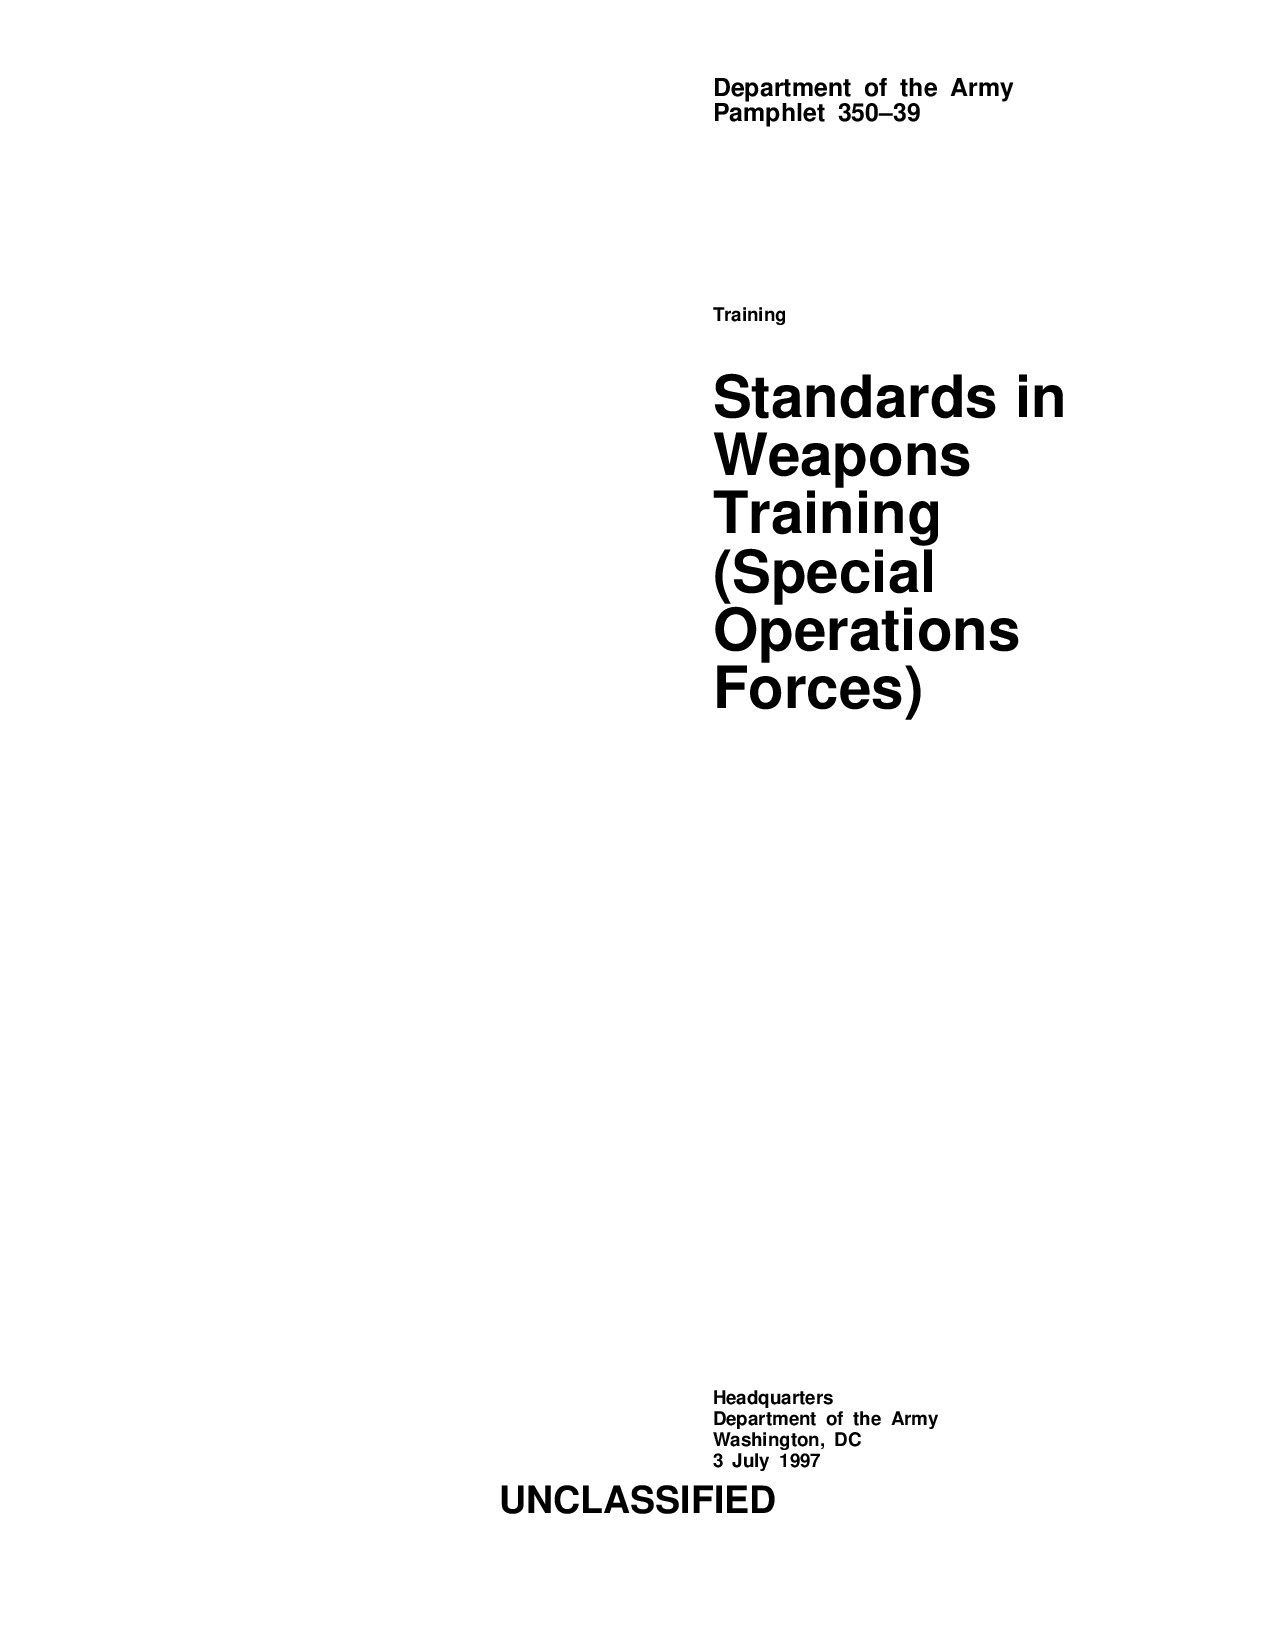 Standards in Weapons Training (Special Operations Forces)